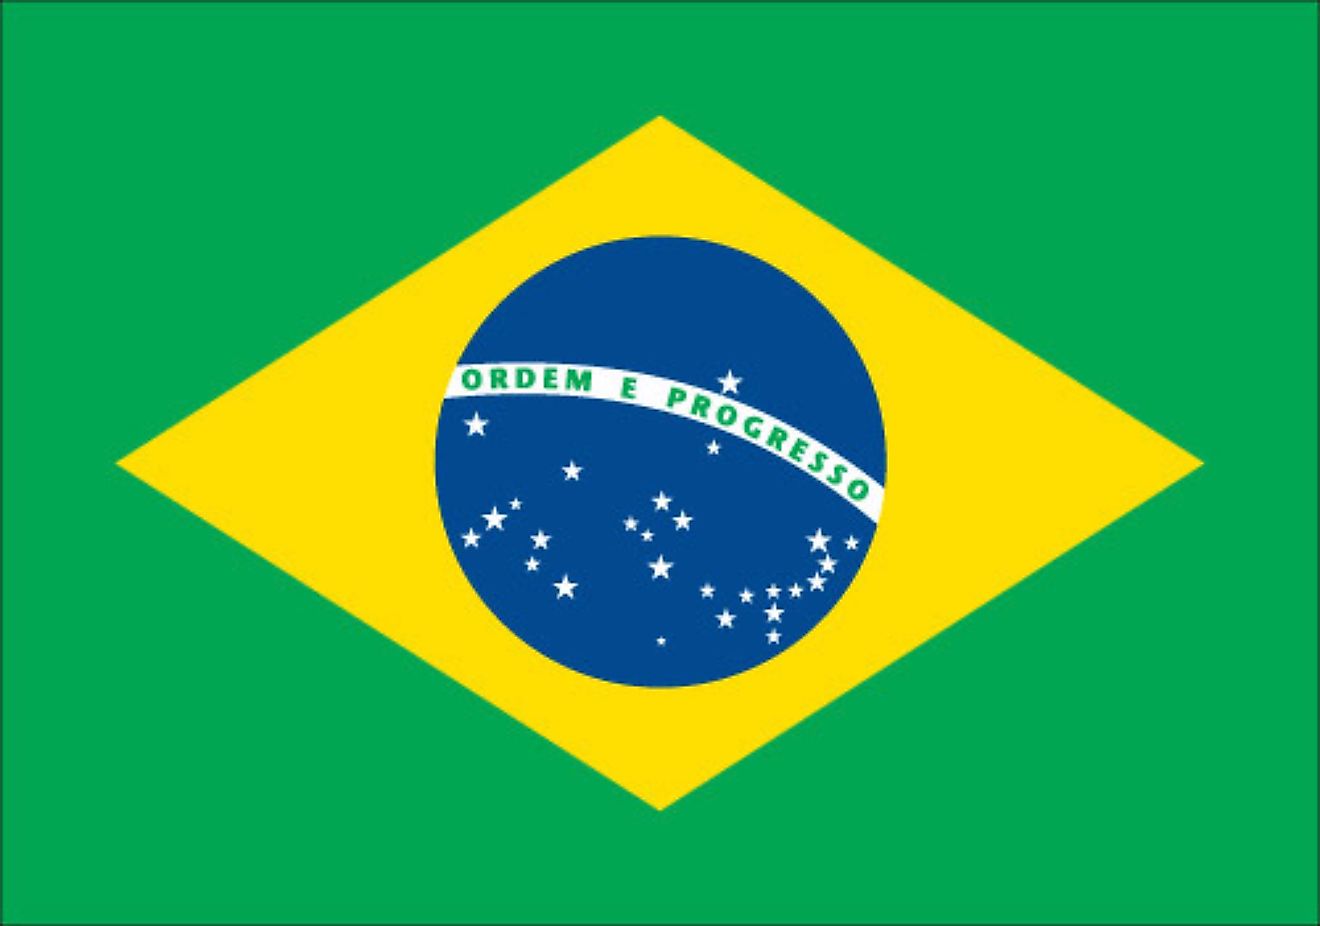 The National Flag of Brazil (Verde e amarela) features a green field with a large yellow diamond (rhombus), with a floating blue celestial globe in its center.